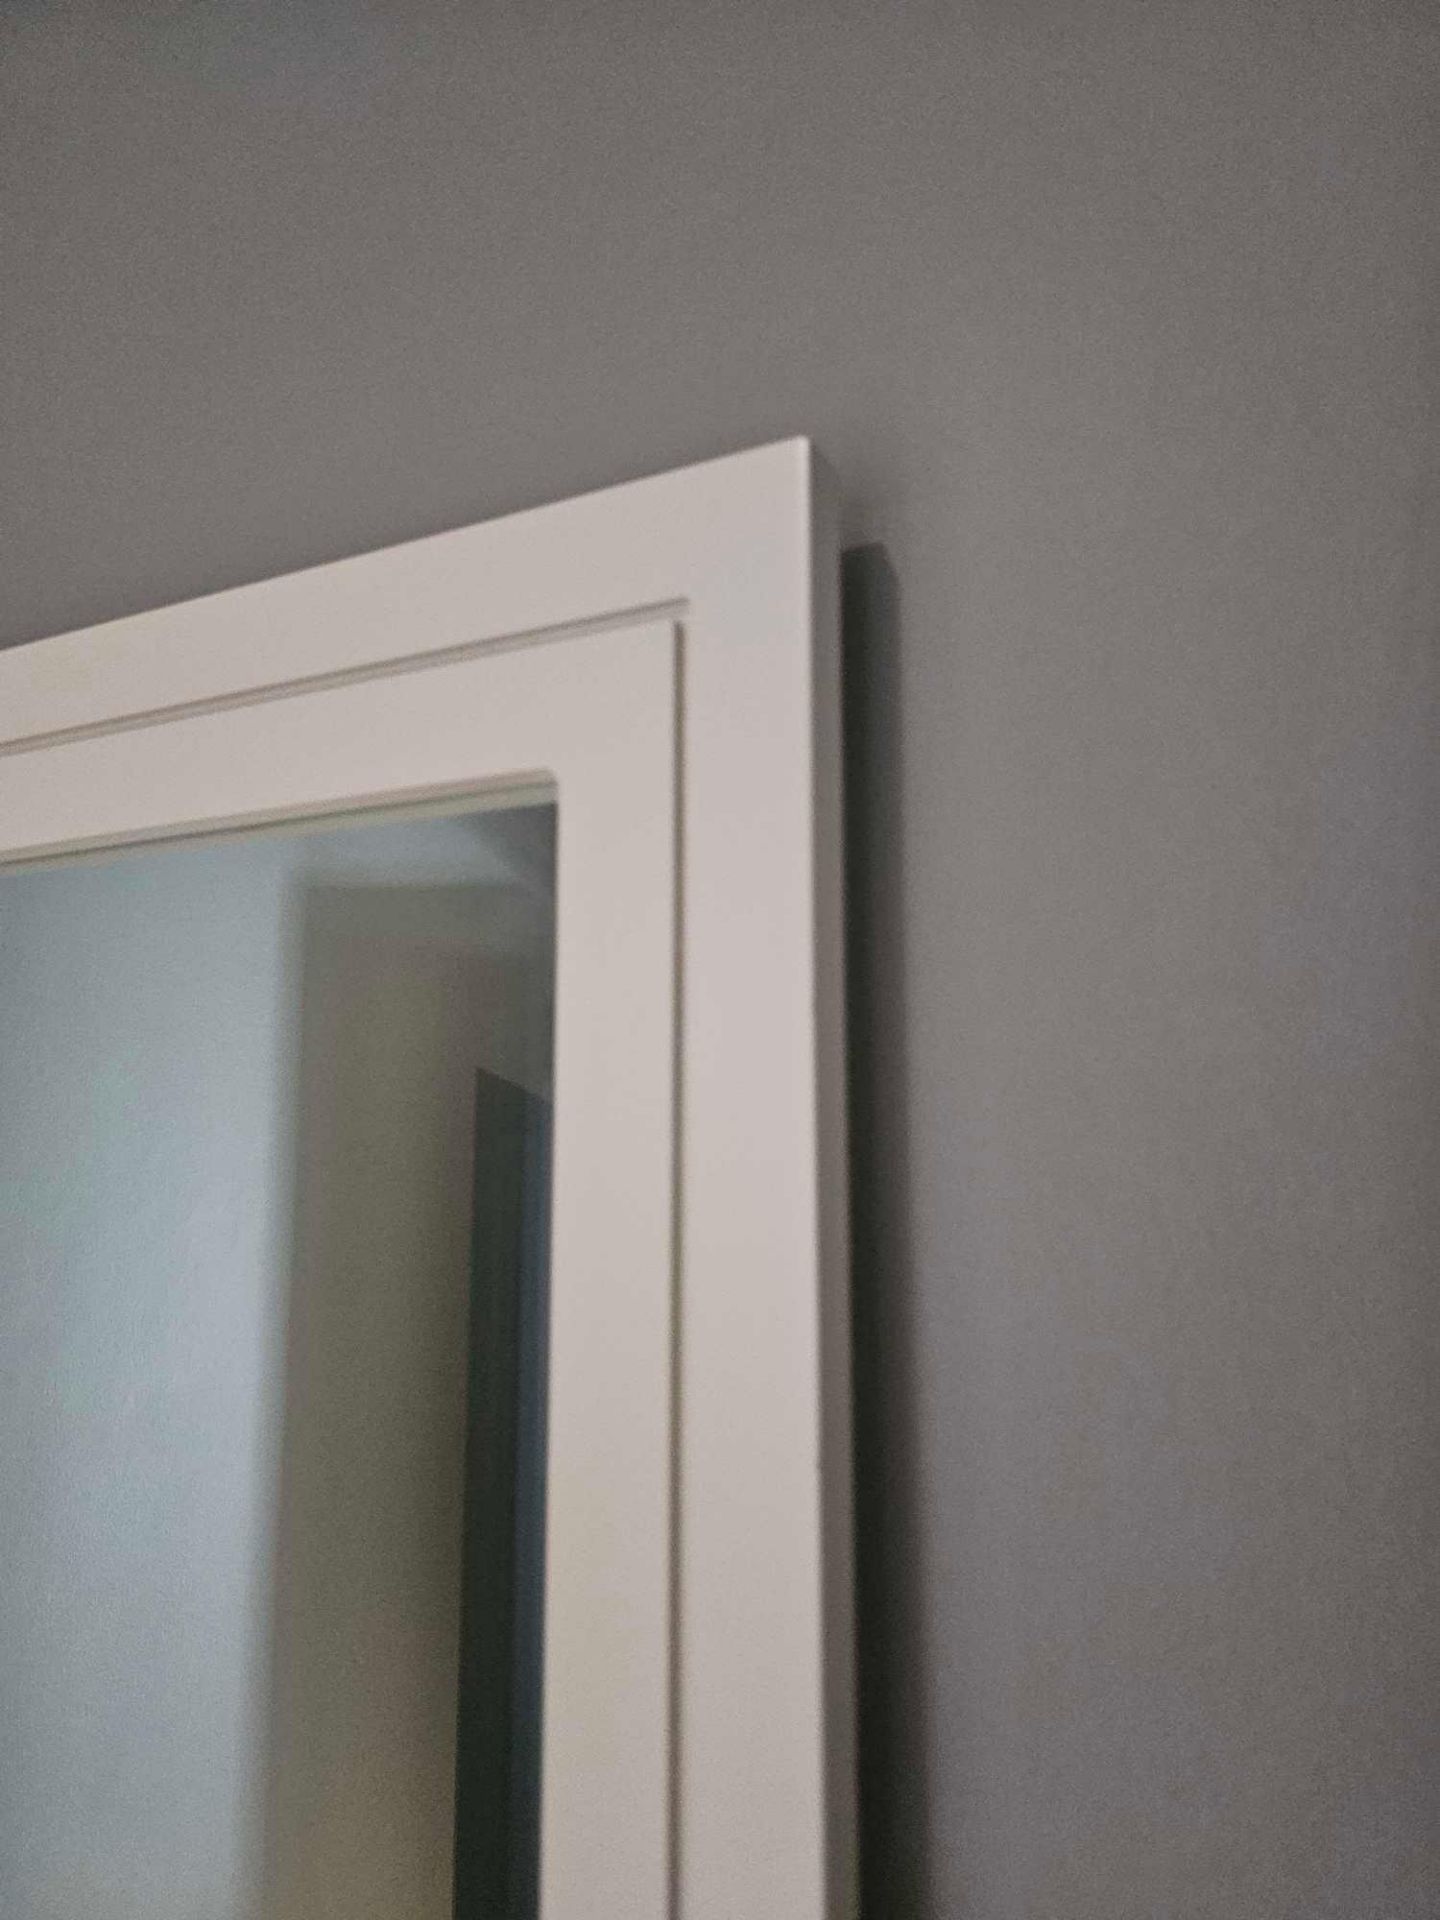 Full Height Dress Mirror A Bright White Gloss Finish On A Clean, Contemporary, Classic Design, - Image 2 of 2